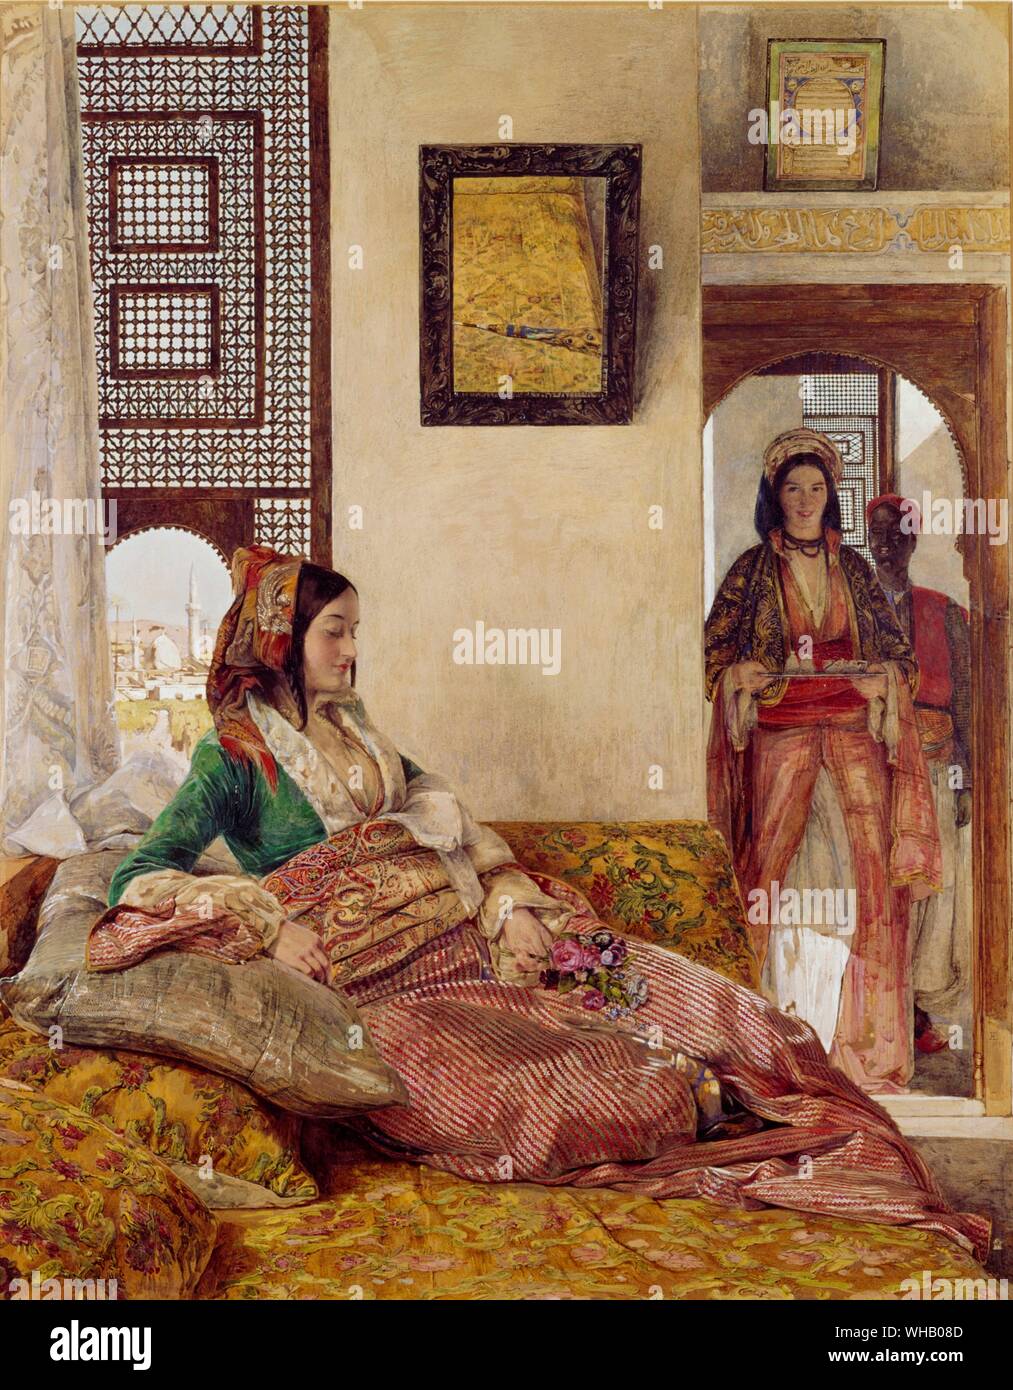 Life in the Harem, Cairo - 1858. by John F. Lewis - Lewis, John Frederick (1805-76). in the V&A. In the Arab tradition, imitated by other Muslim cultures, the harîm is the part of the household forbidden to male strangers. . In Western languages such as English, this term refers collectively to the wives in a polygynous household as well as the no-males allowed area, or in more modern usage to a number of women followers or admirers of a man.. Stock Photo